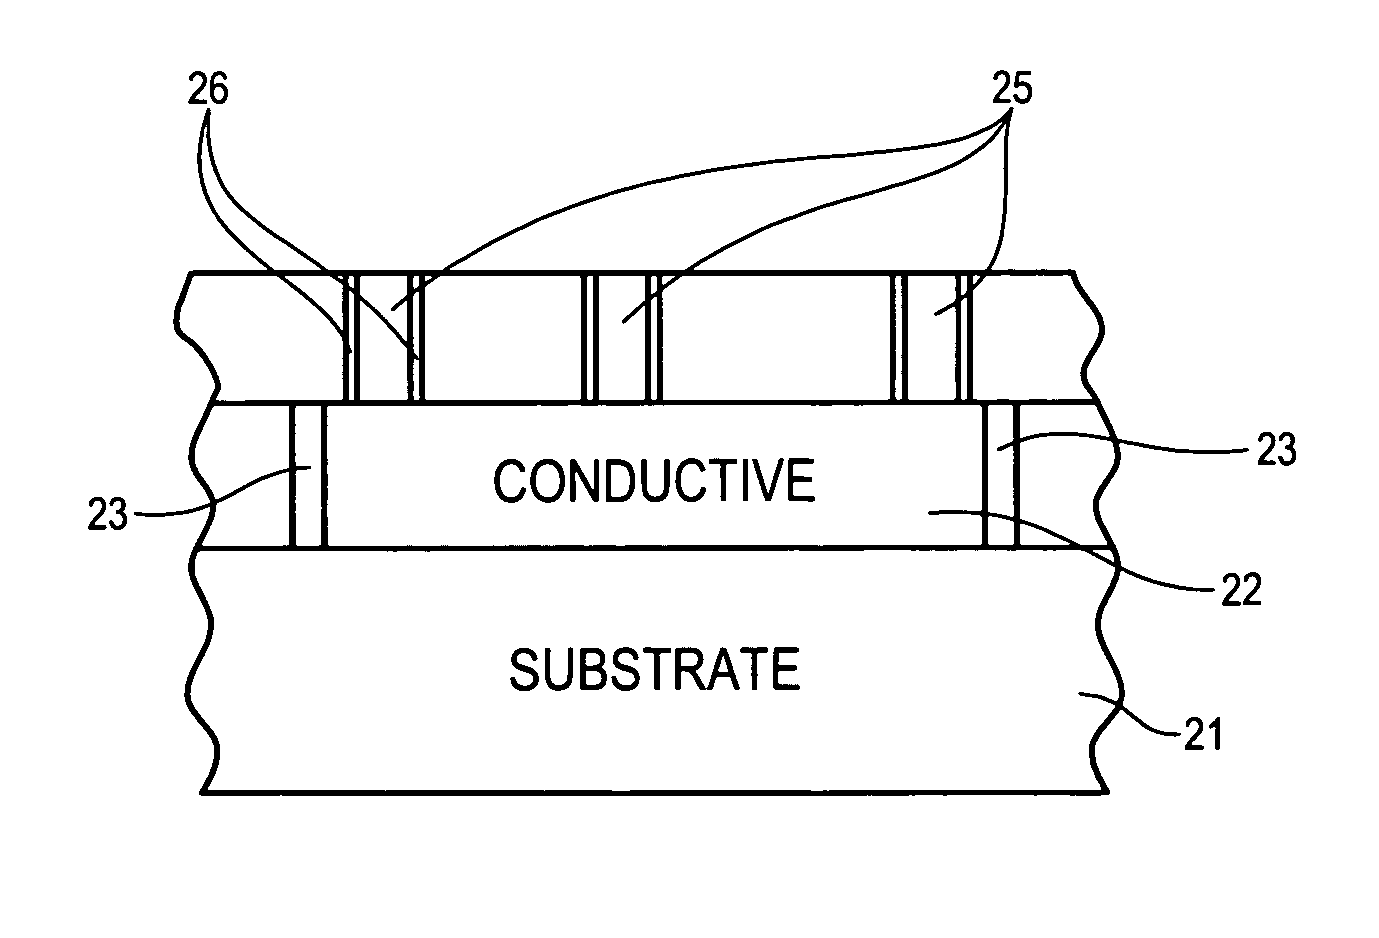 Metallic nanowire interconnections for integrated circuit fabrication